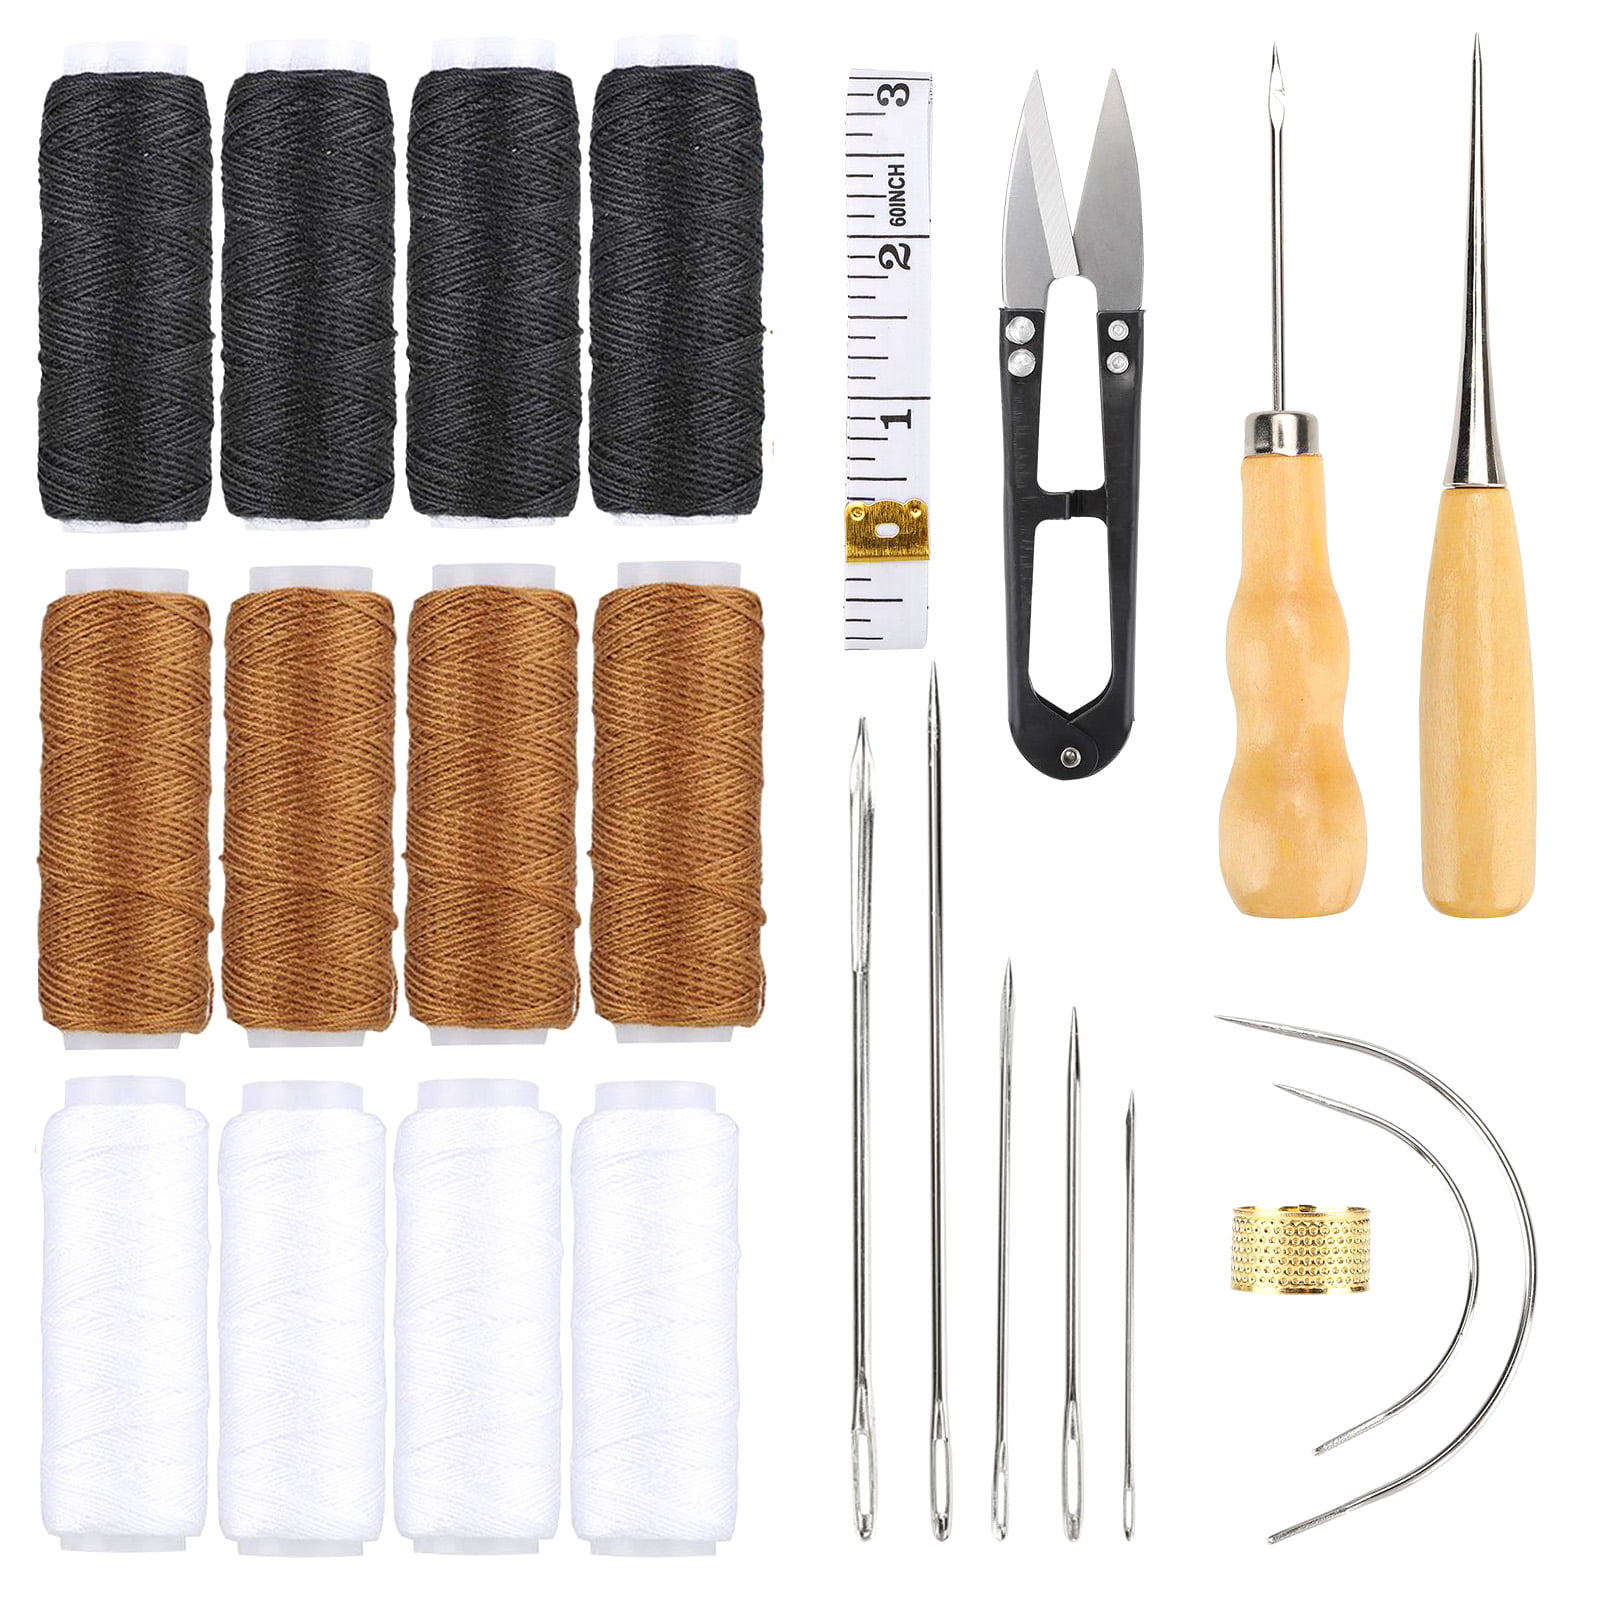 Leather Craft Tools Kit Hand Sewing Waxed Thread Needles Awl DIY Shoe Repair Set 